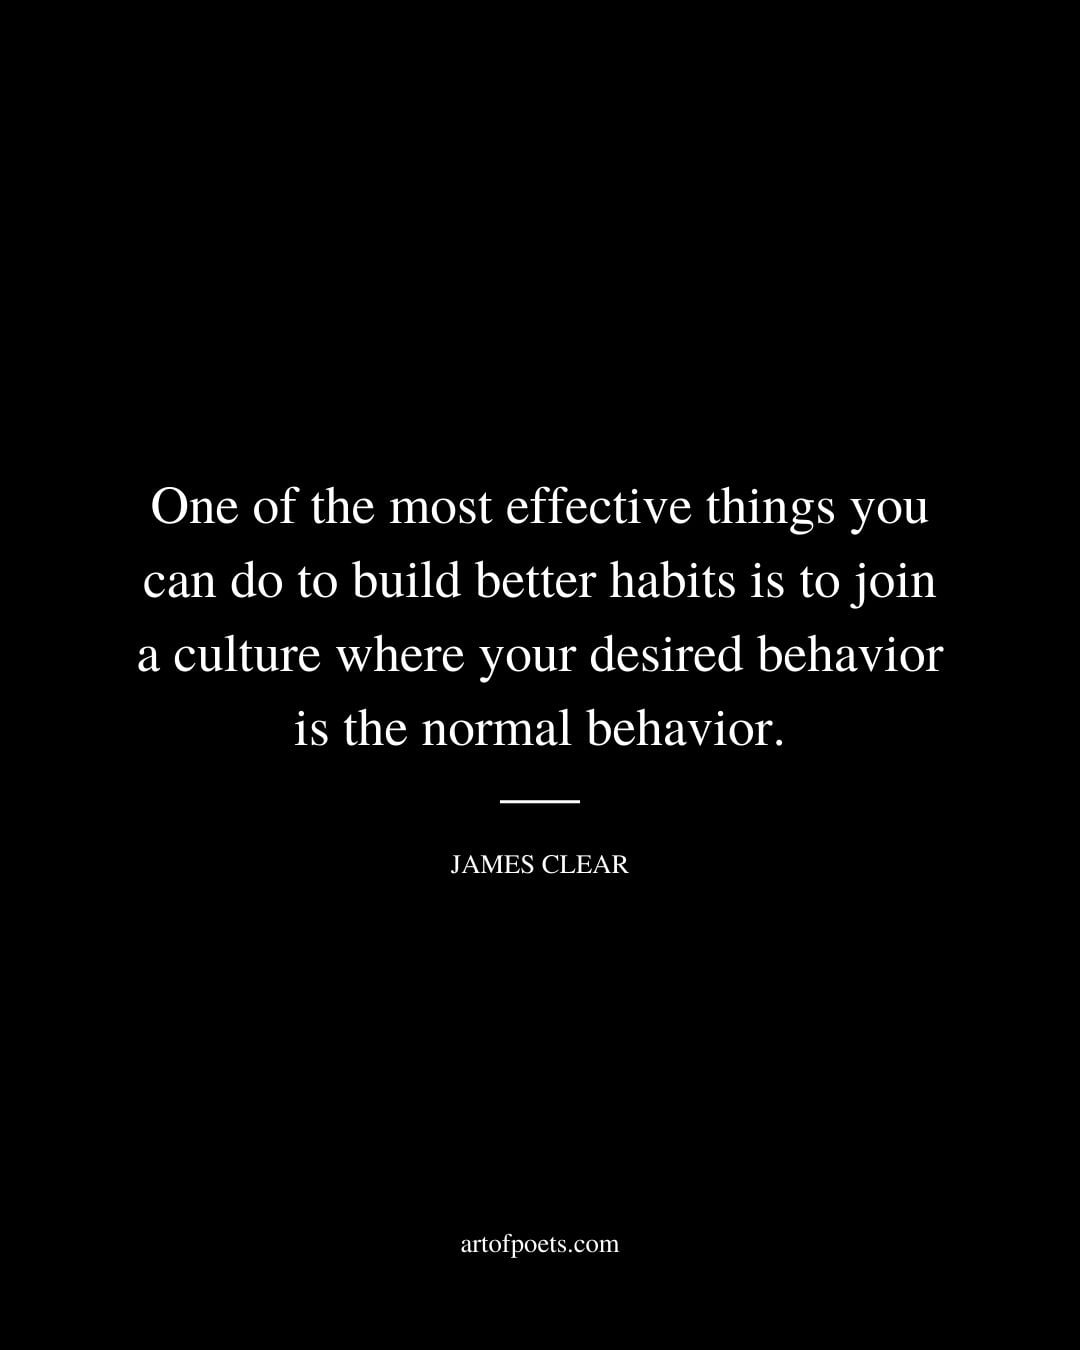 One of the most effective things you can do to build better habits is to join a culture where your desired behavior is the normal behavior